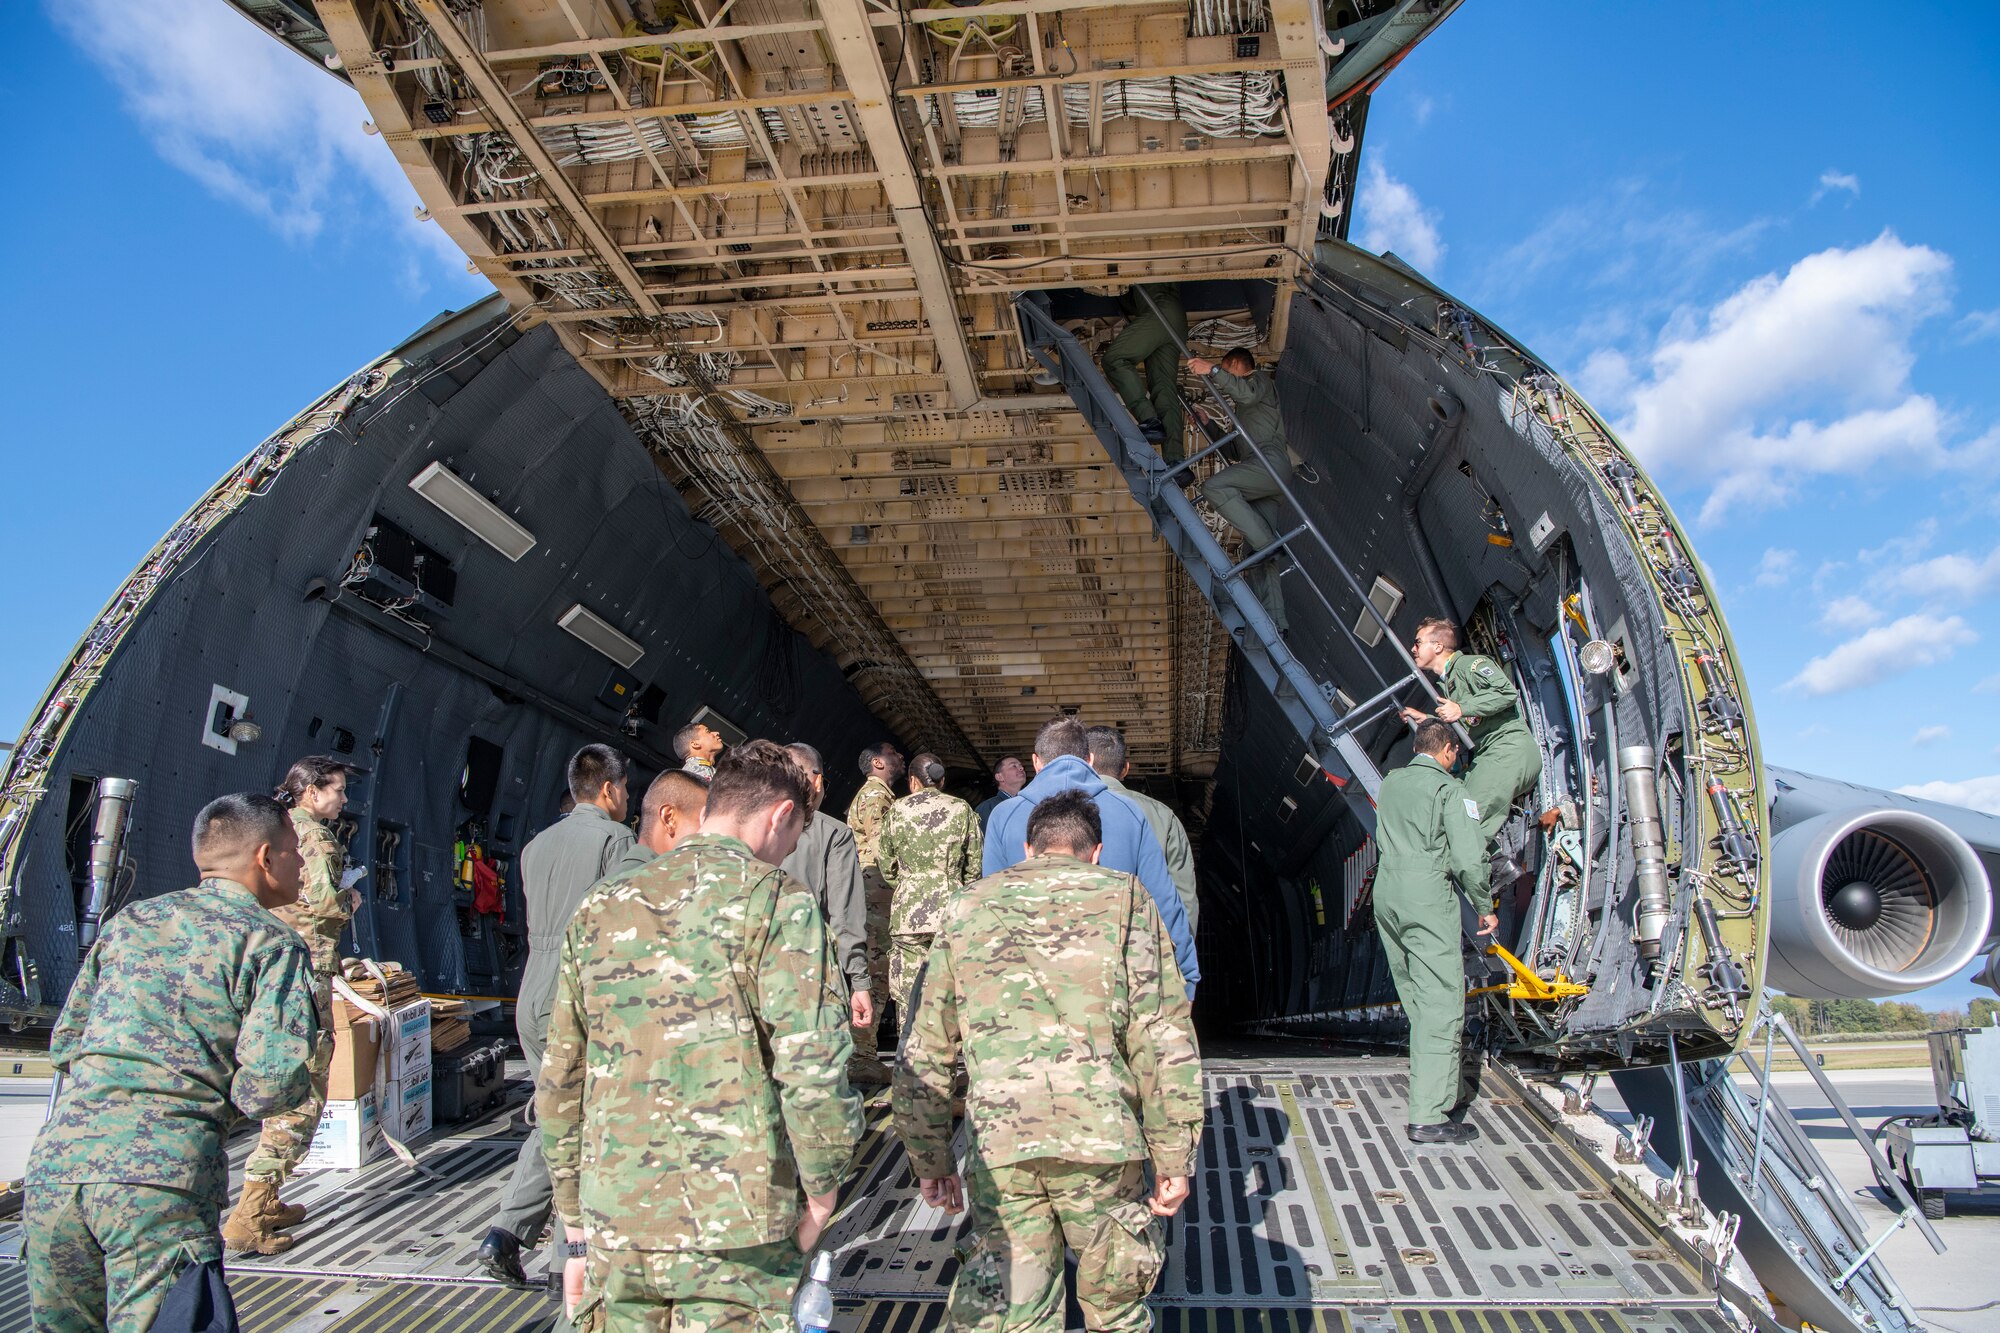 Cadets from the Latin American Cadet Initiative climb the troop compartment stairs on a C-5M Super Galaxy during their visit Oct. 17, 2019, at Dover Air Force Base, Del. The cadets were transported to the flight line to tour a static C-5M Super Galaxy after the briefings in the 3rd Airlift Squadron auditorium. (U.S. Air Force photo by Senior Airman Christopher Quail)